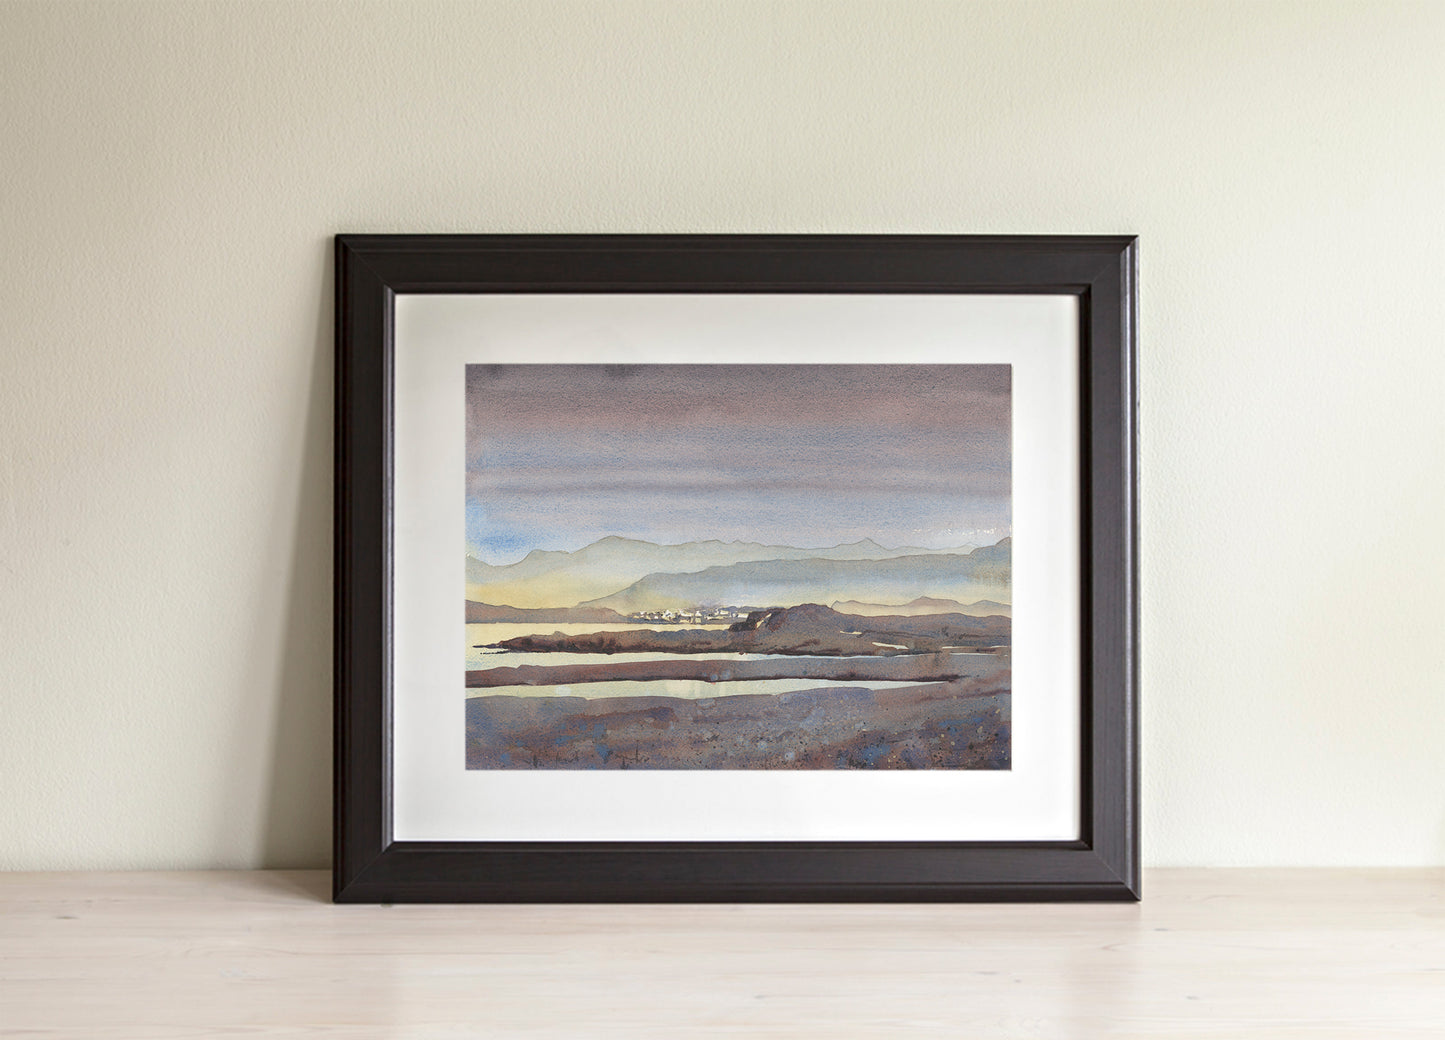 Colorful sunset art Iceland landscape small town handmade item housewarming gift giclee (print)